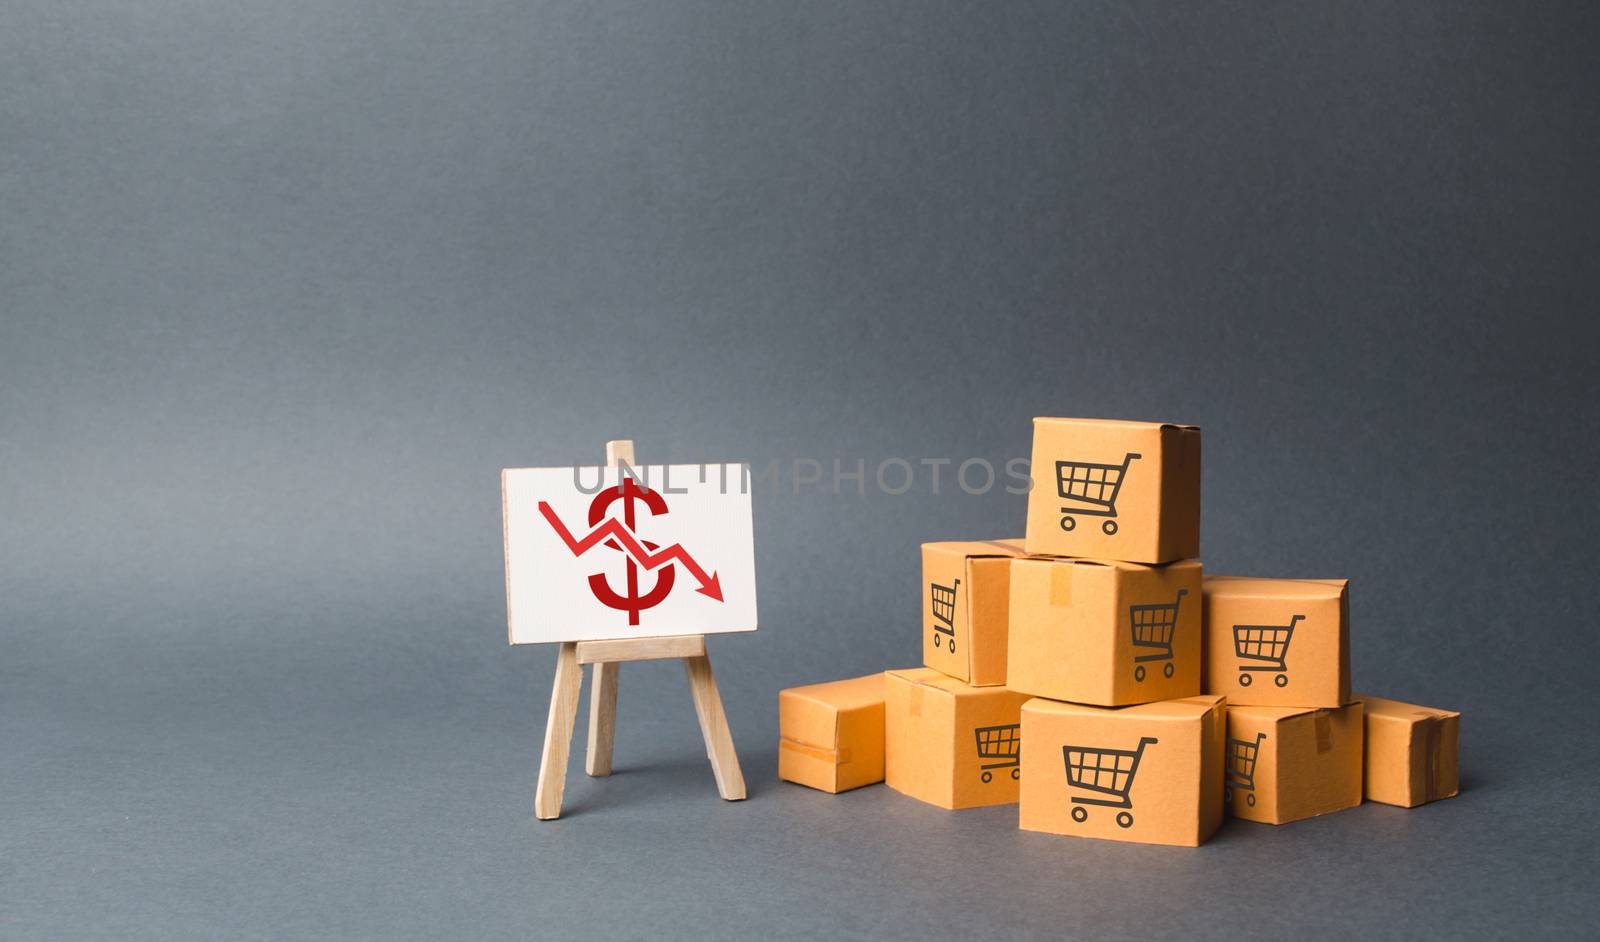 A pile of cardboard boxes and stand with a red down arrow. decline in the production of goods and products, the economic downturn and recession. Falling consumer demand, Falling prices, lower profits by iLixe48